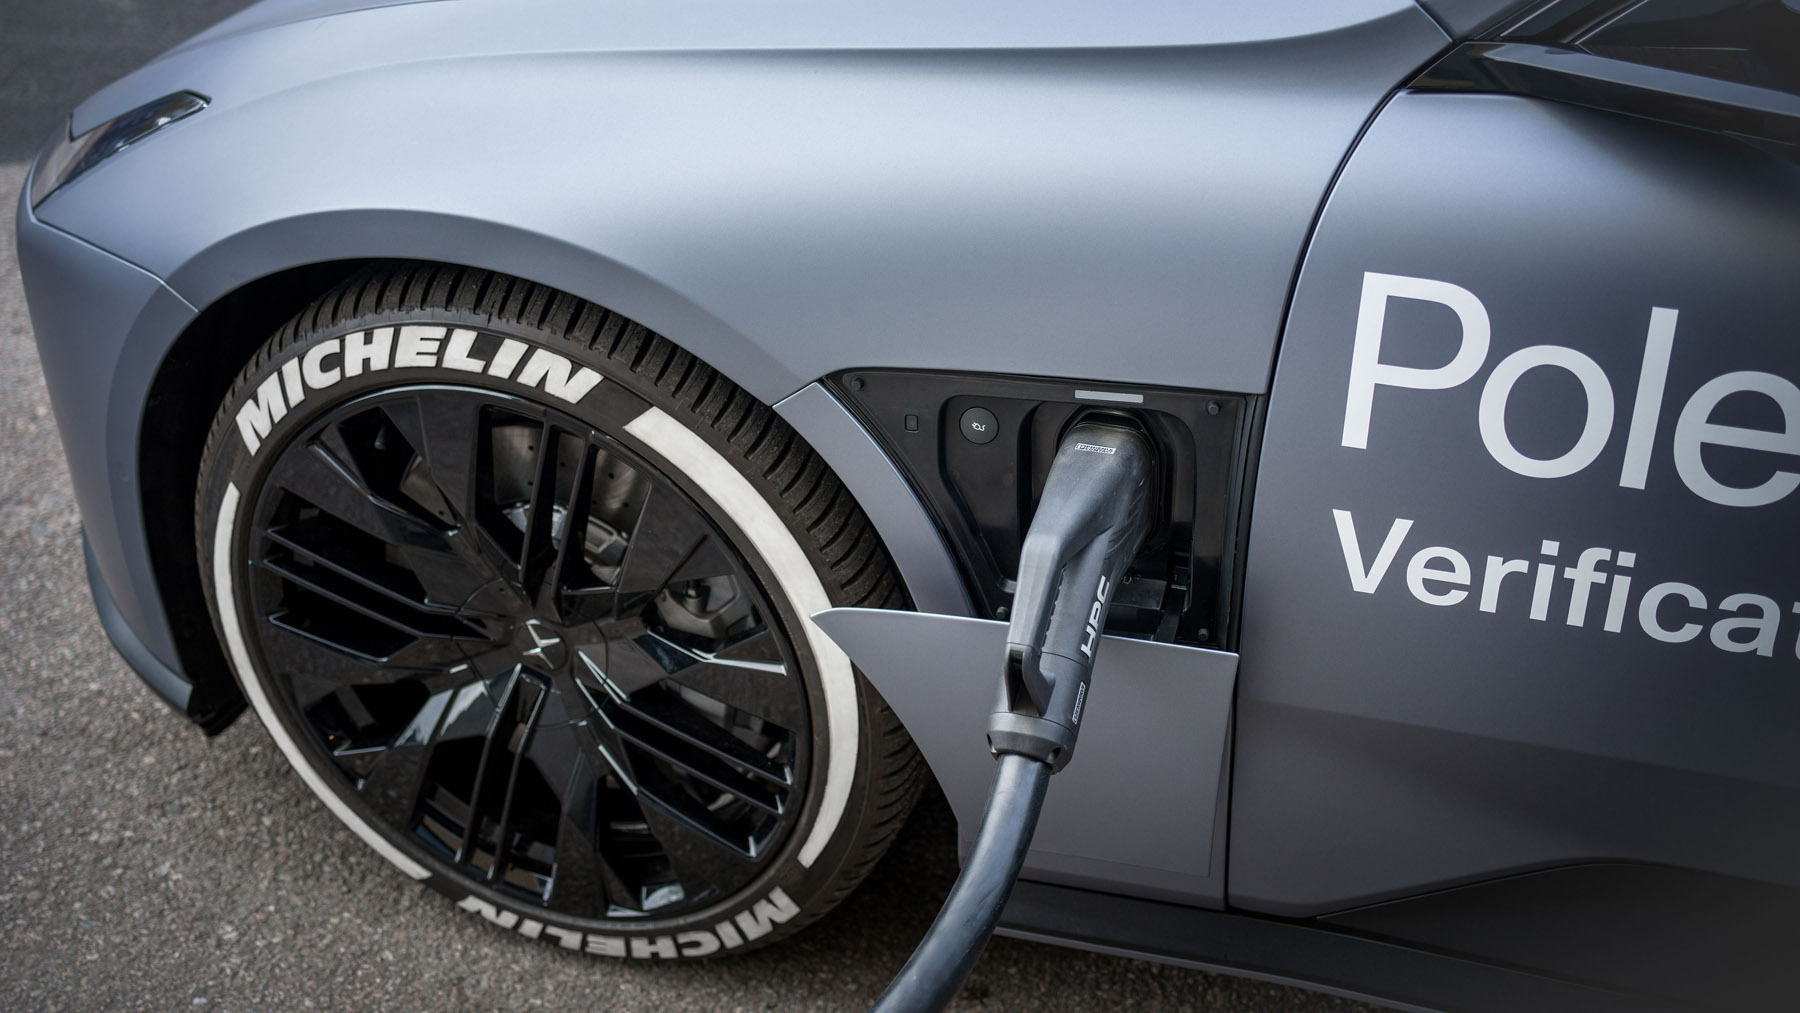 Polestar Prototype Gives Lightning-Fast Charging in Just 10 Minutes